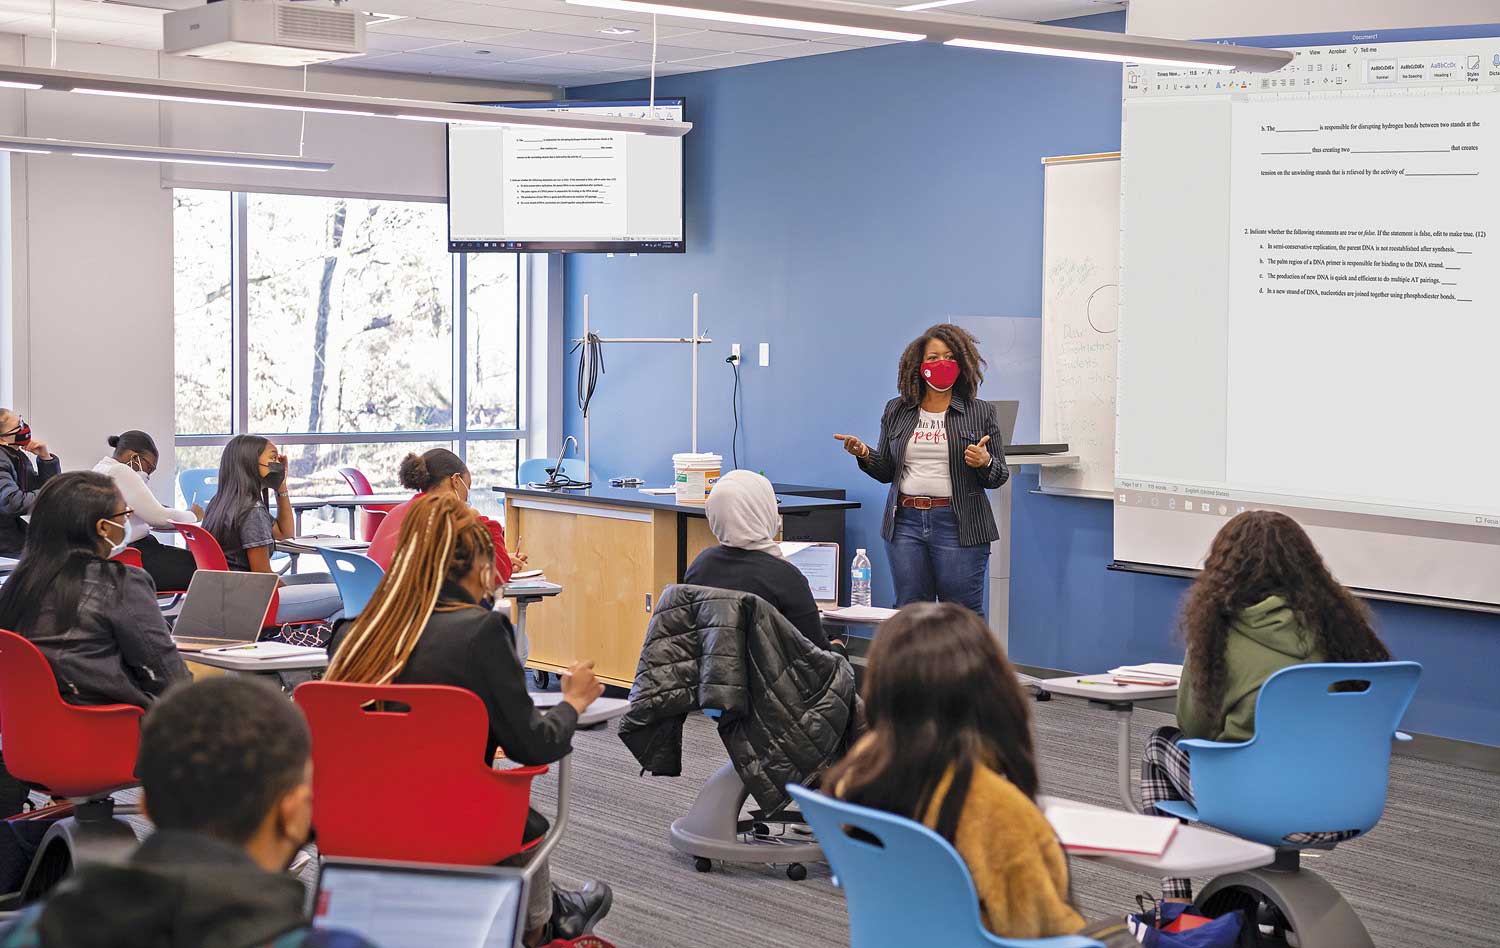 Popular Health Science and Cell Biology courses are taught in large classrooms with multiple AV displays. Cell Biology class session is shown here.